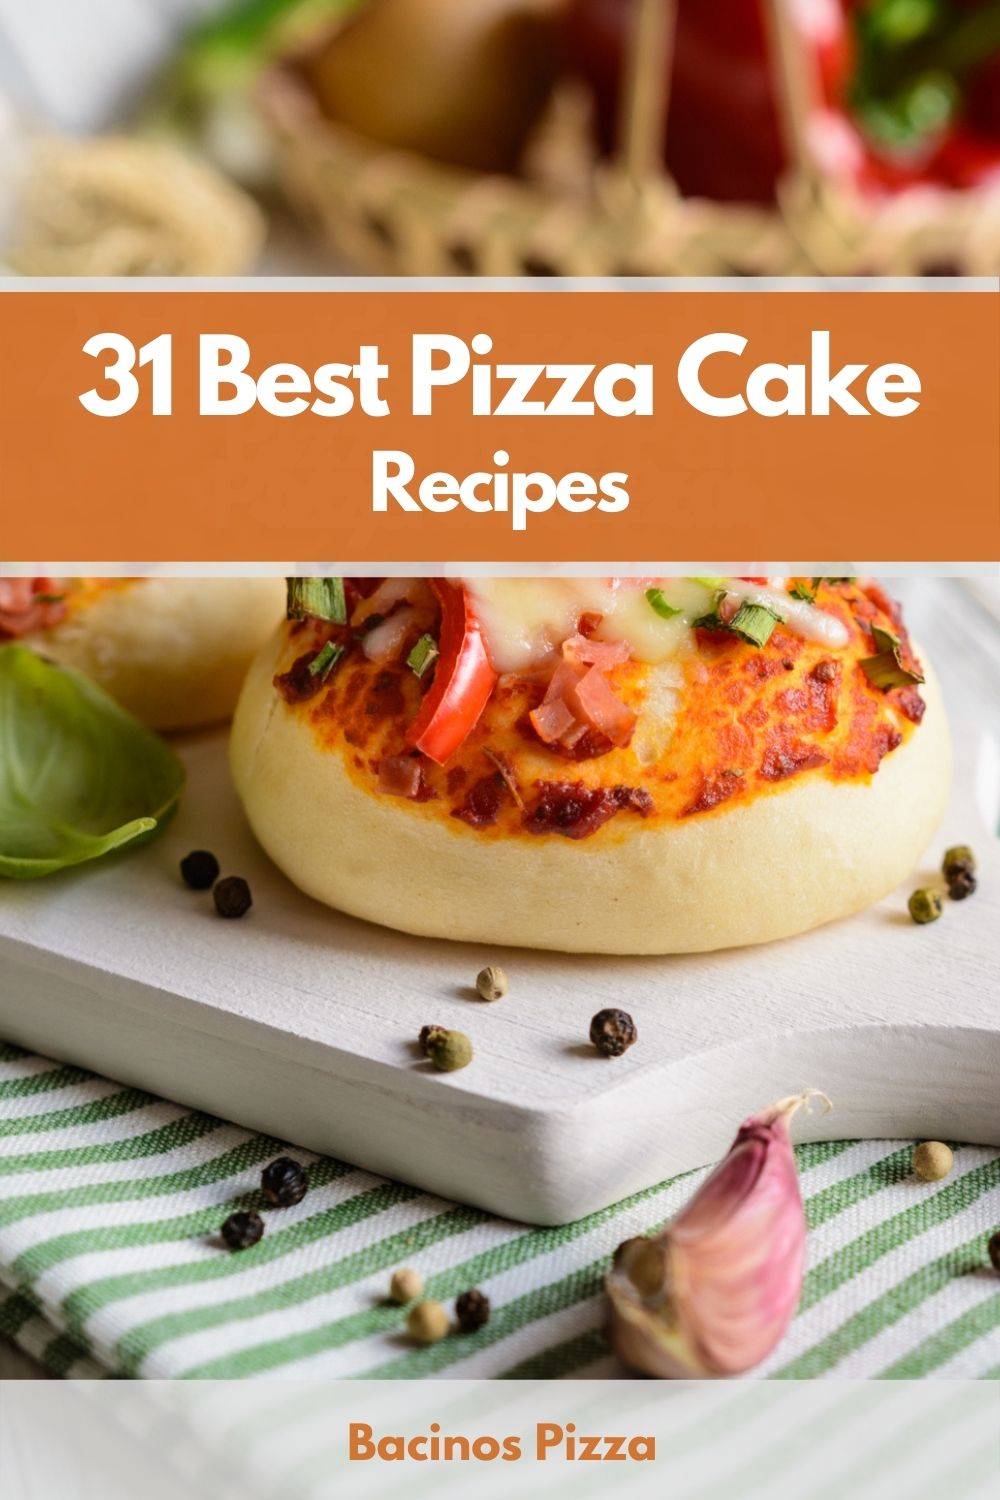 31 Best Pizza Cake Recipes pin